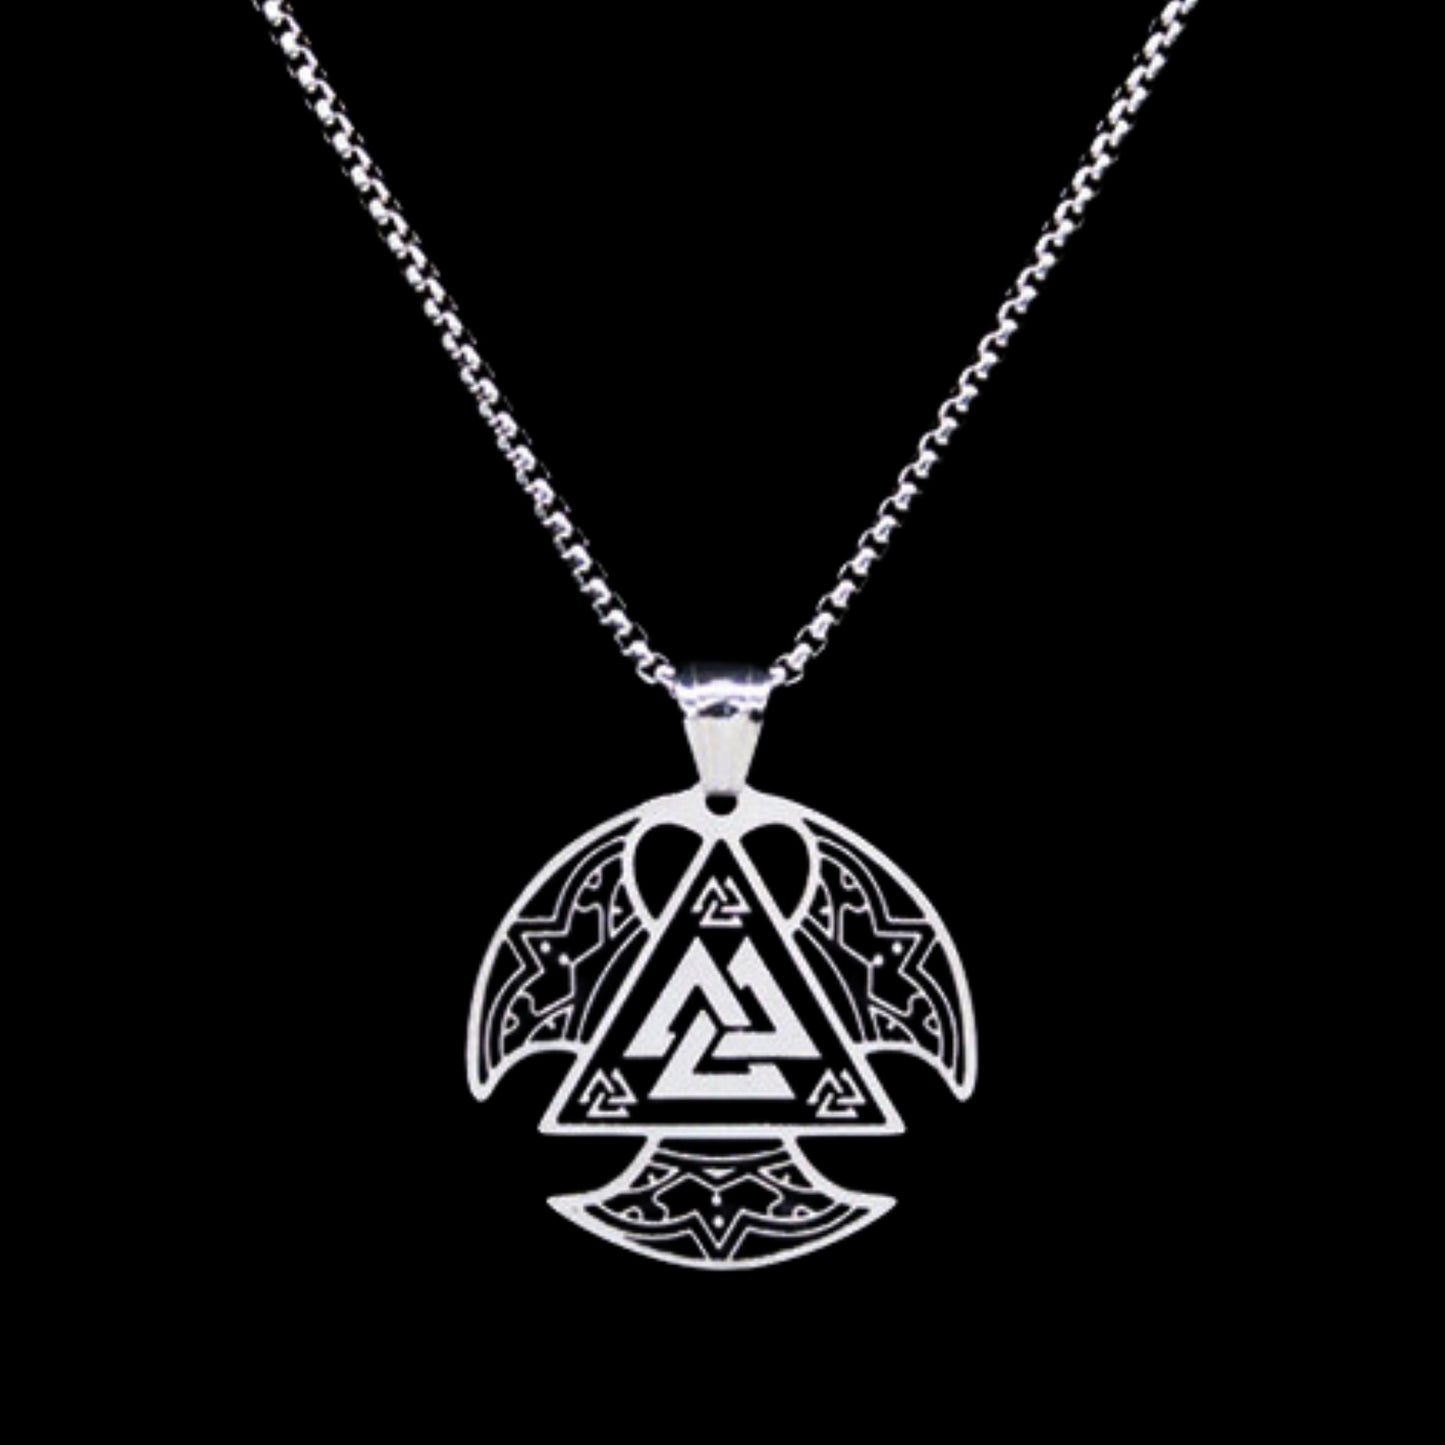 Valknut and Blades Necklace